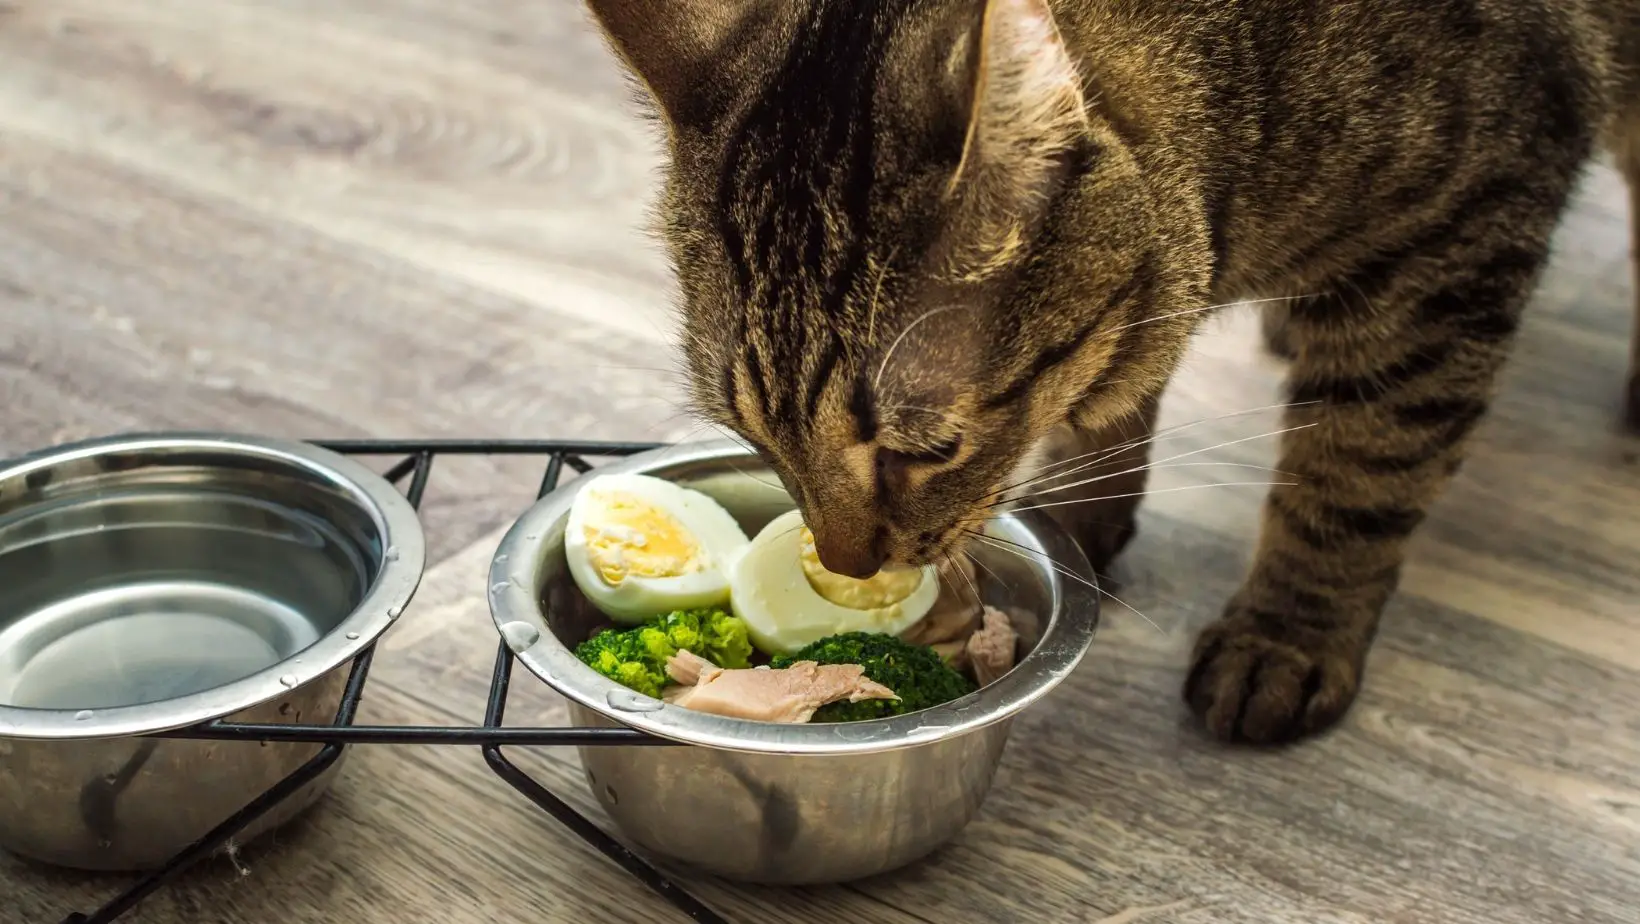 What Human Food Can Cats Eat?